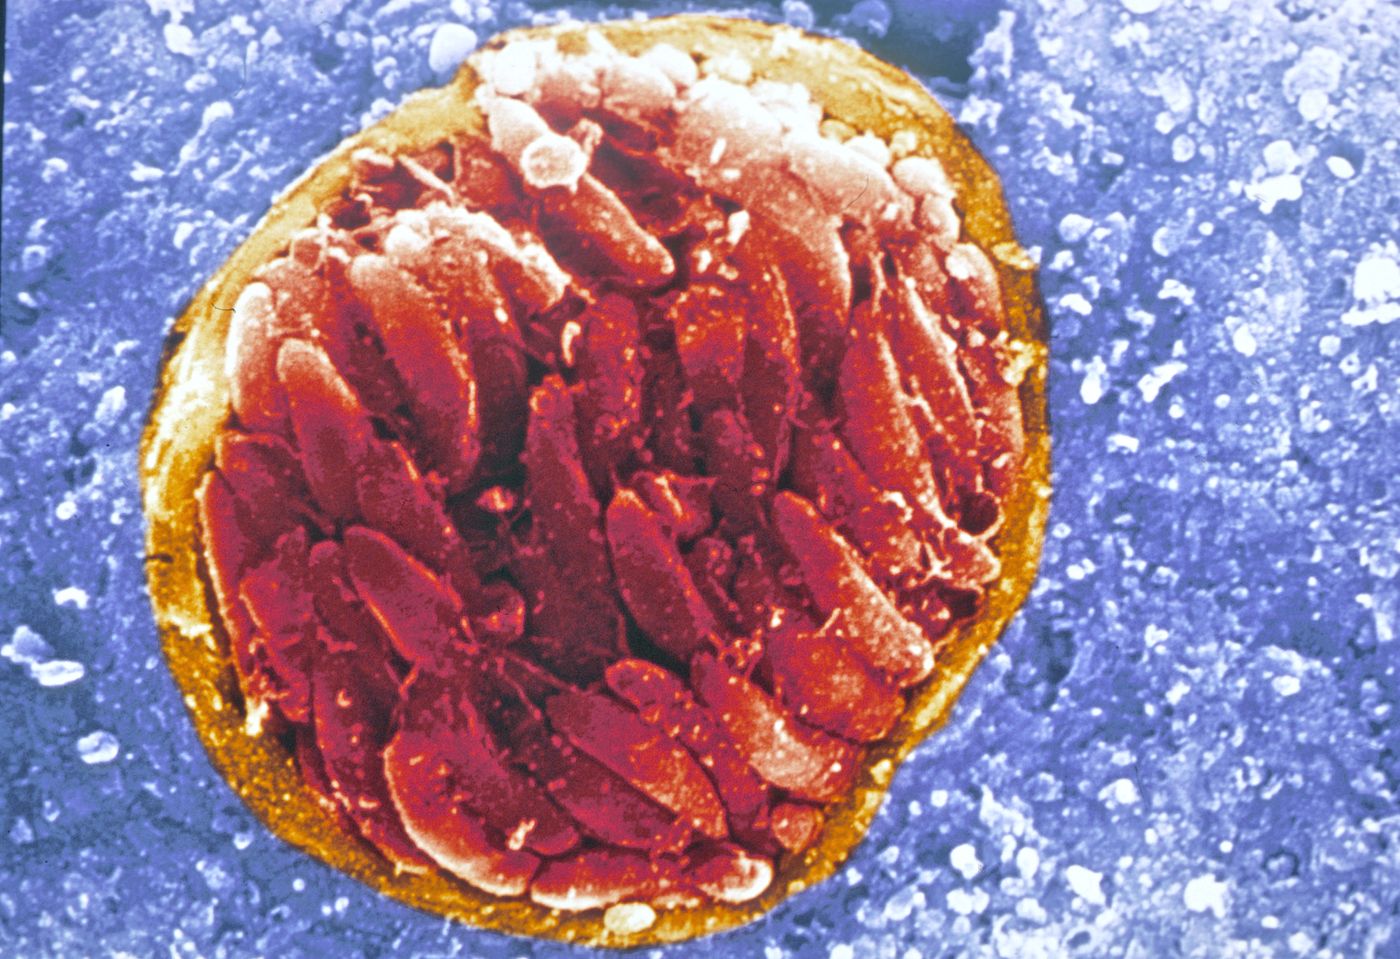 The protozoan Toxoplasma gondii, tissue cyst in brain. Source: Science Life